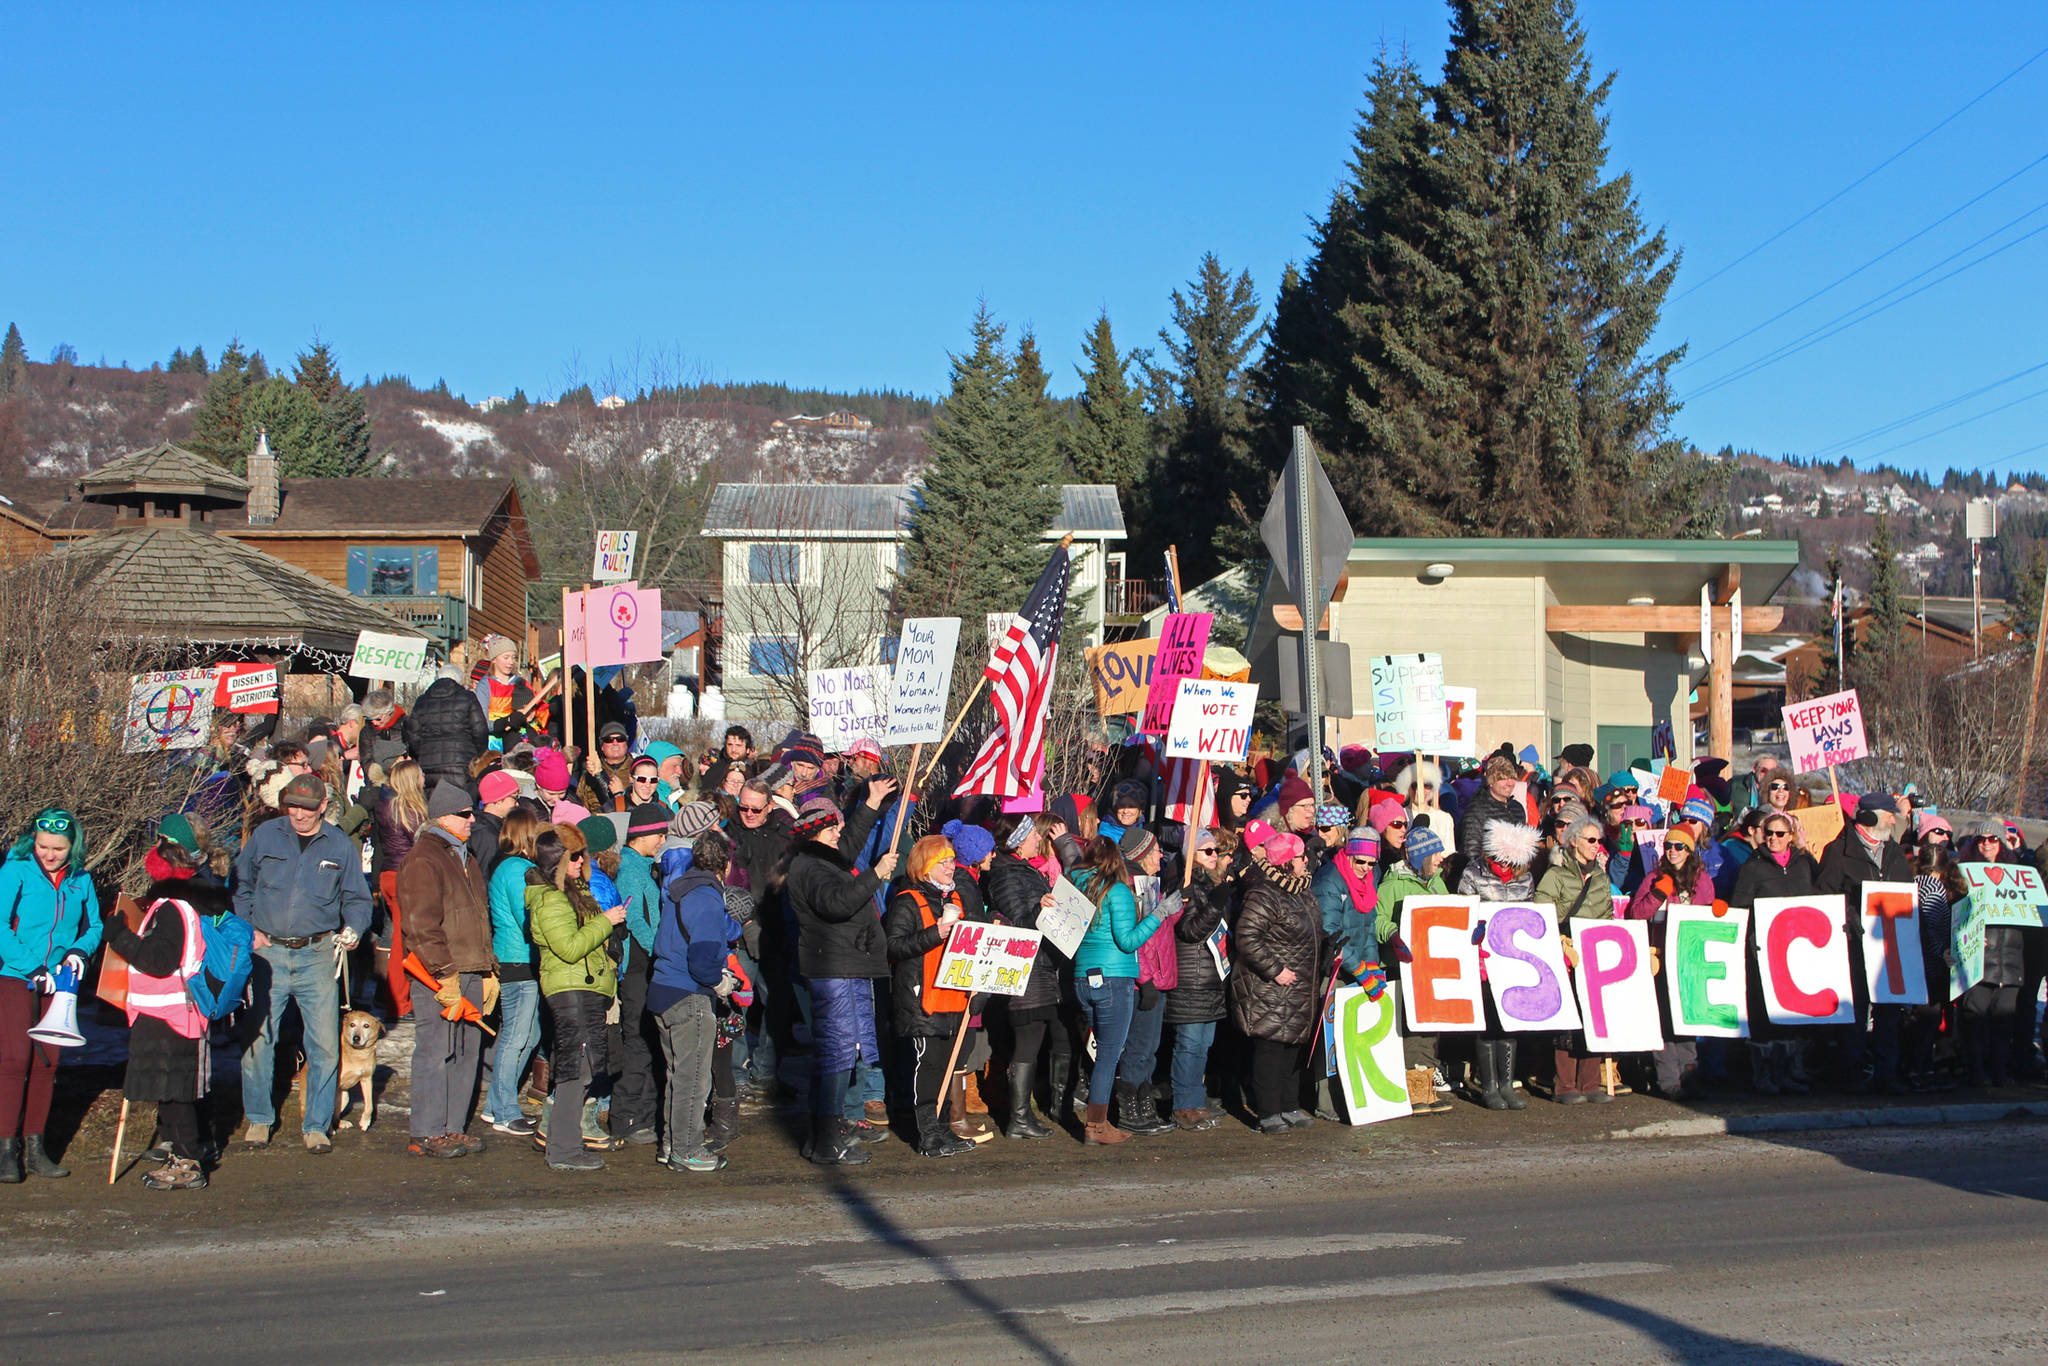 Participants in the 2019 Women’s March on Homer gather at WKFL Park following the march Saturday, Jan. 19, 2019 in Homer, Alaska. (Photo by Megan Pacer/Homer News)